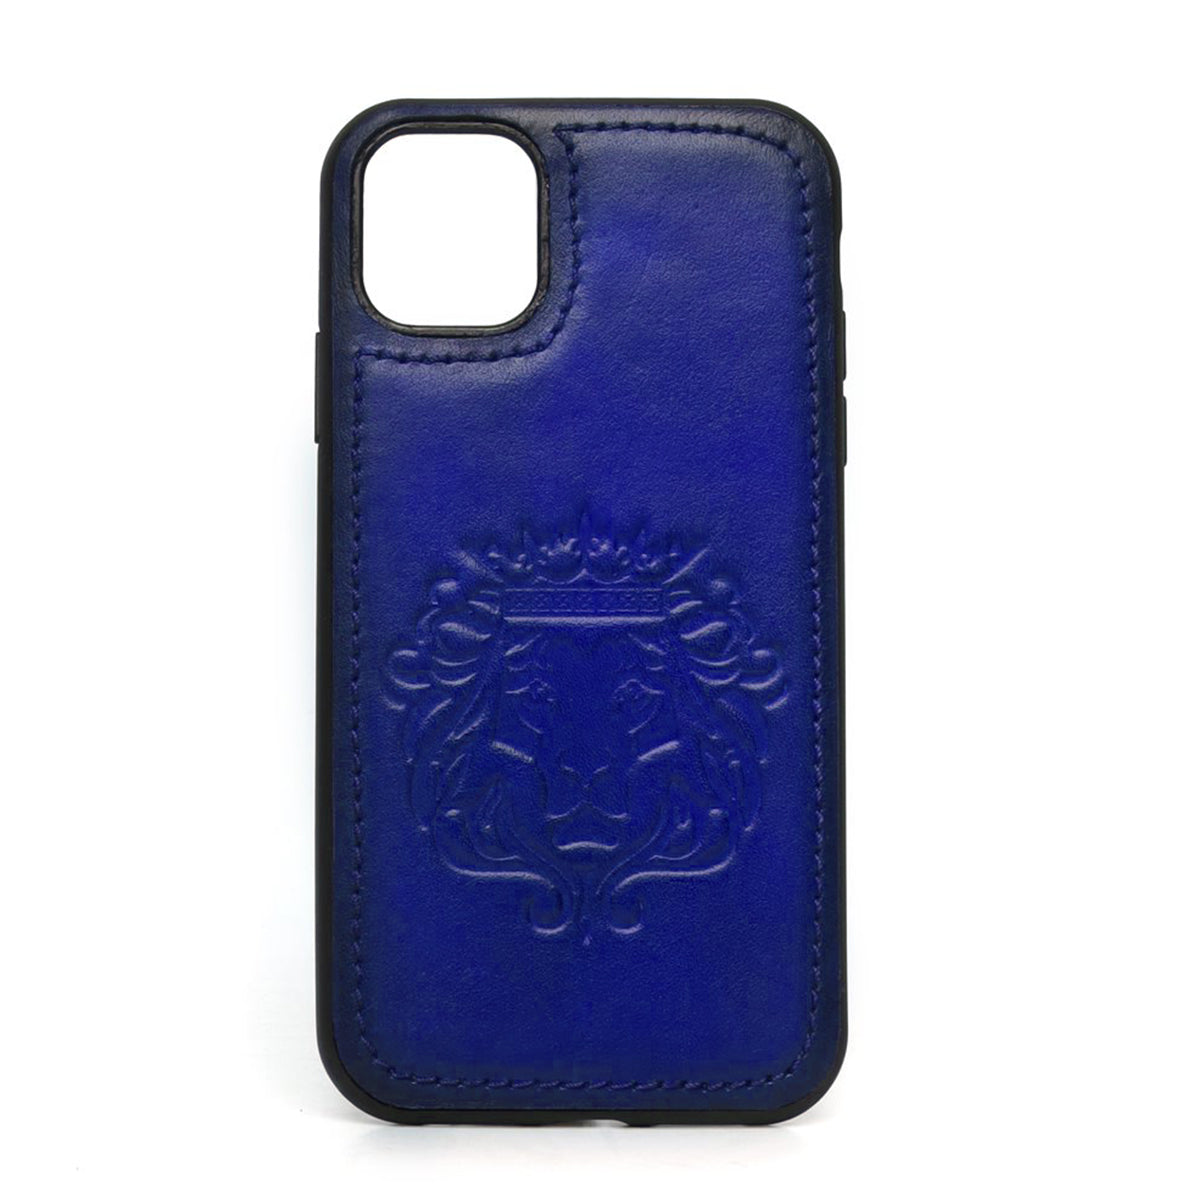 Blue Leather Lion Embossed Mobile Cover by BARESKIN